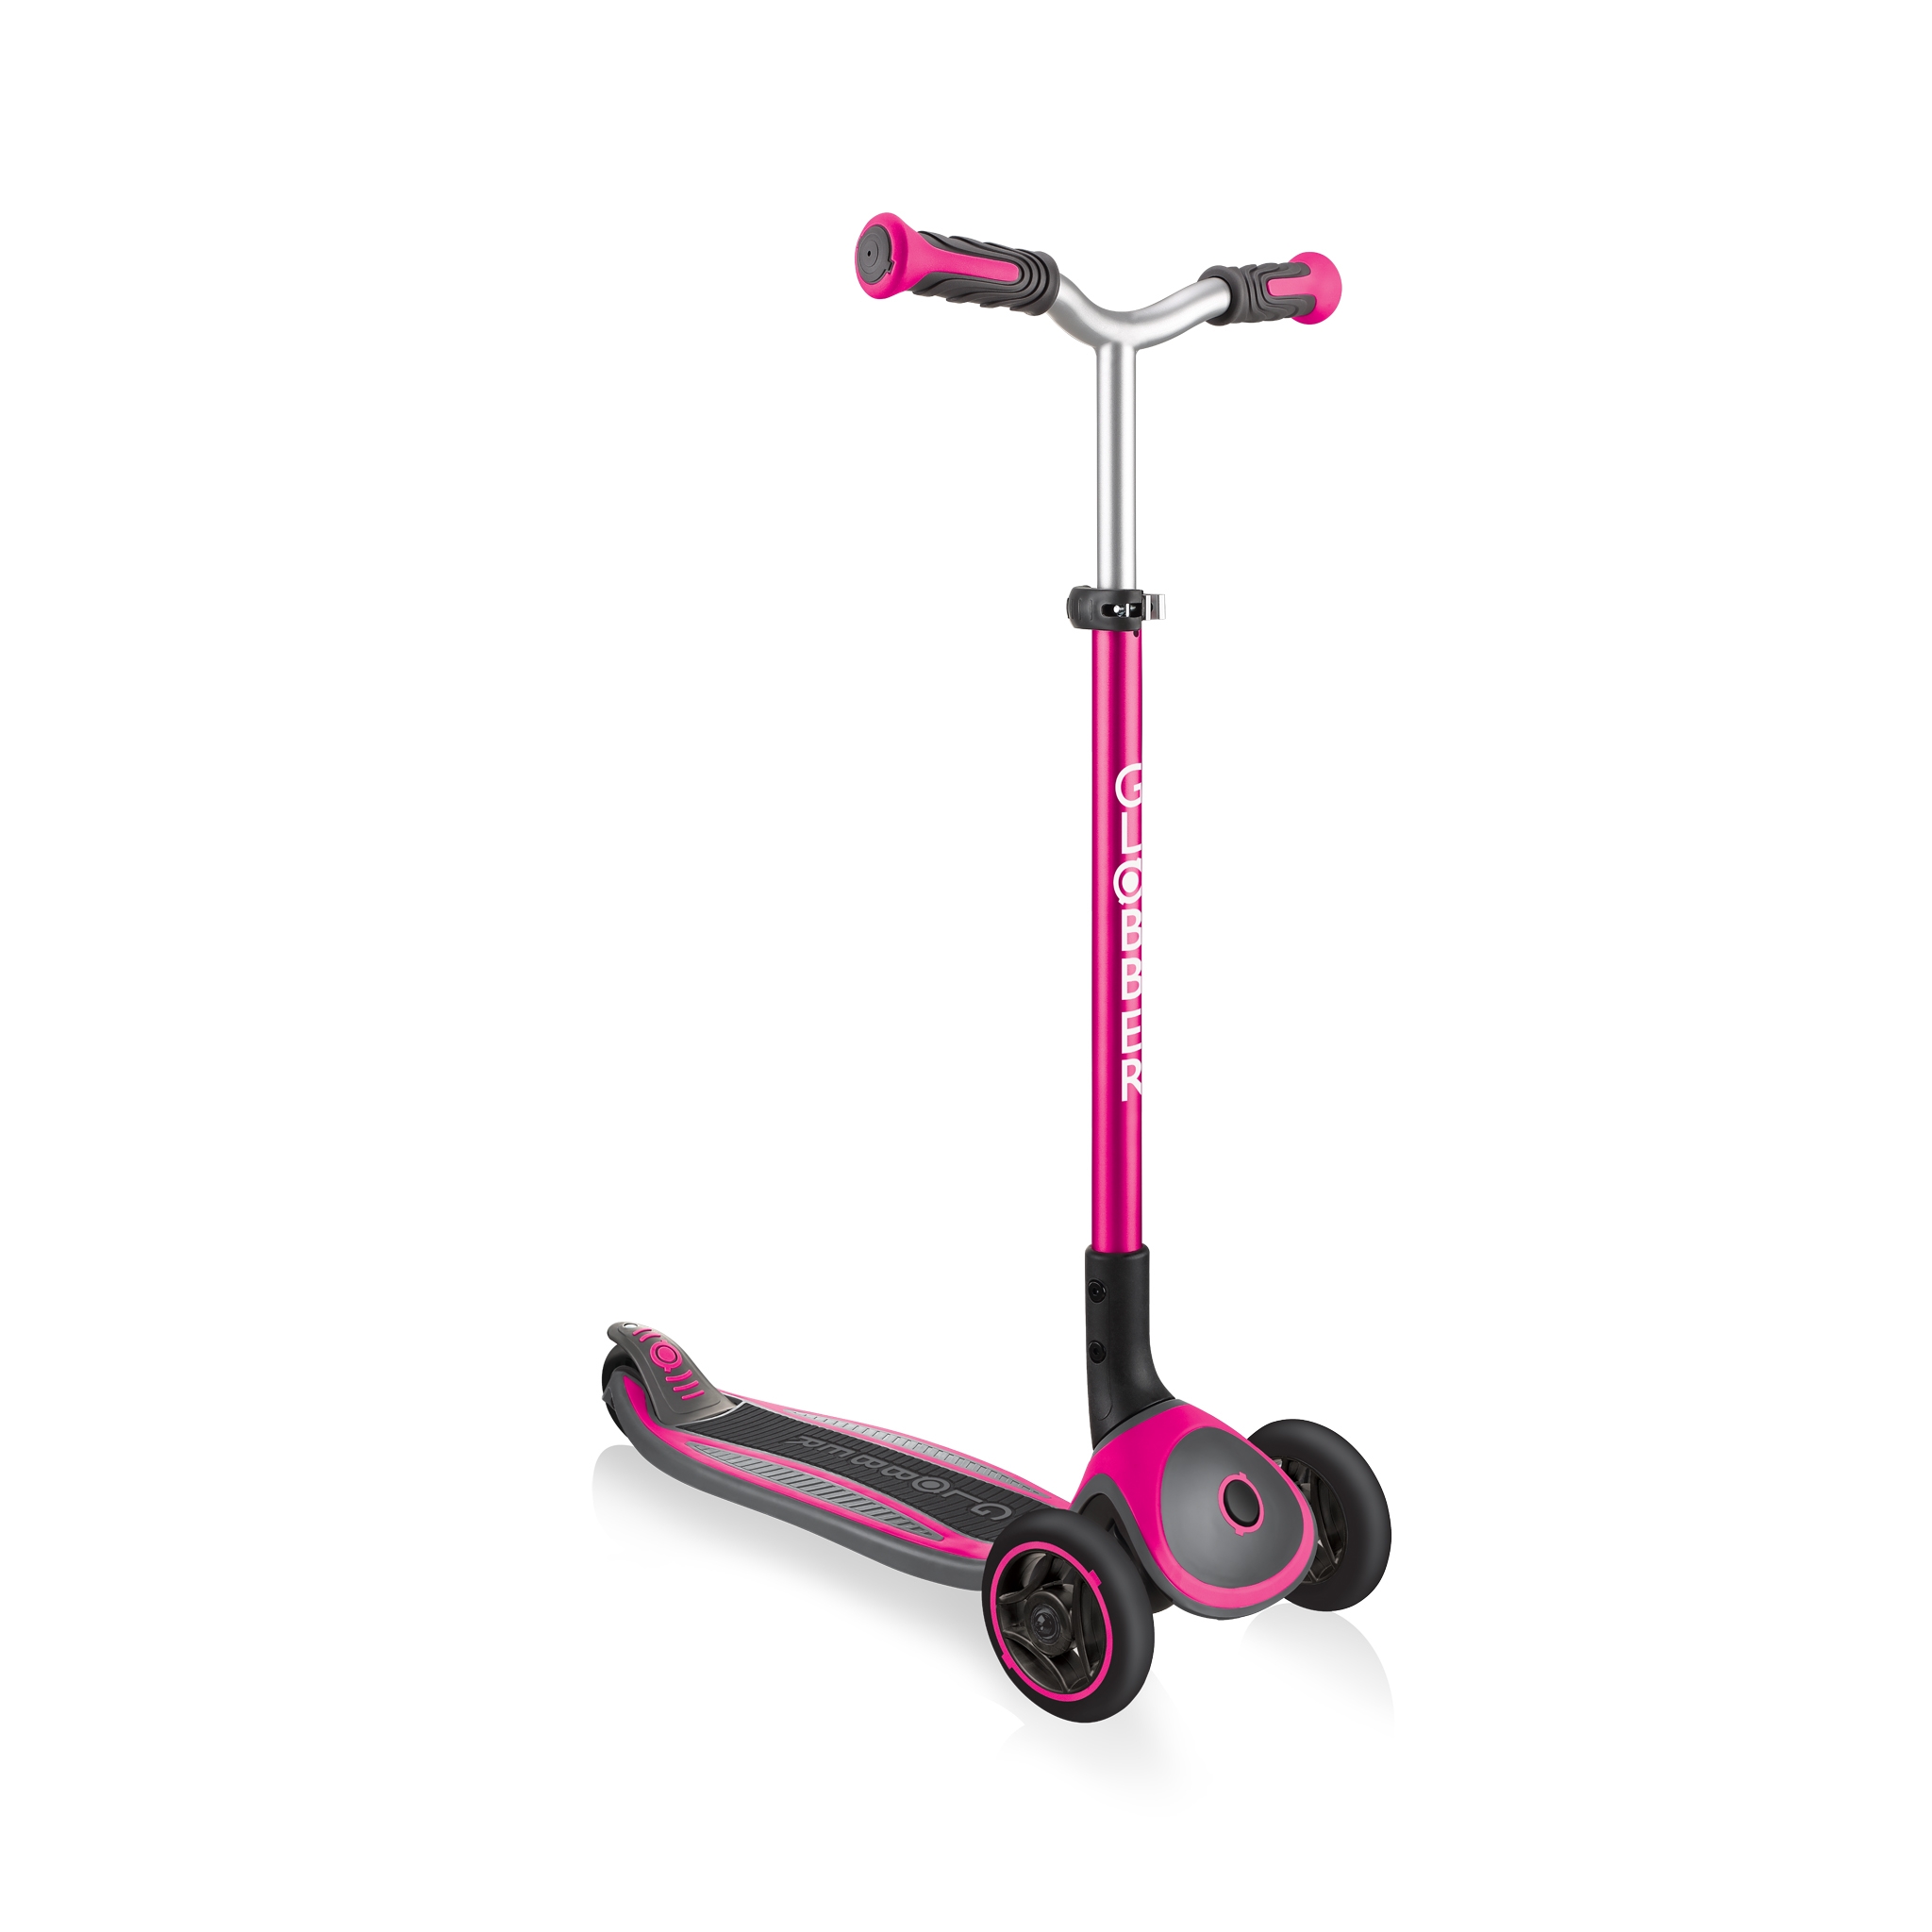 Globber-MASTER-premium-3-wheel-foldable-scooters-for-kids-aged-4-to-14_deep-pink 1